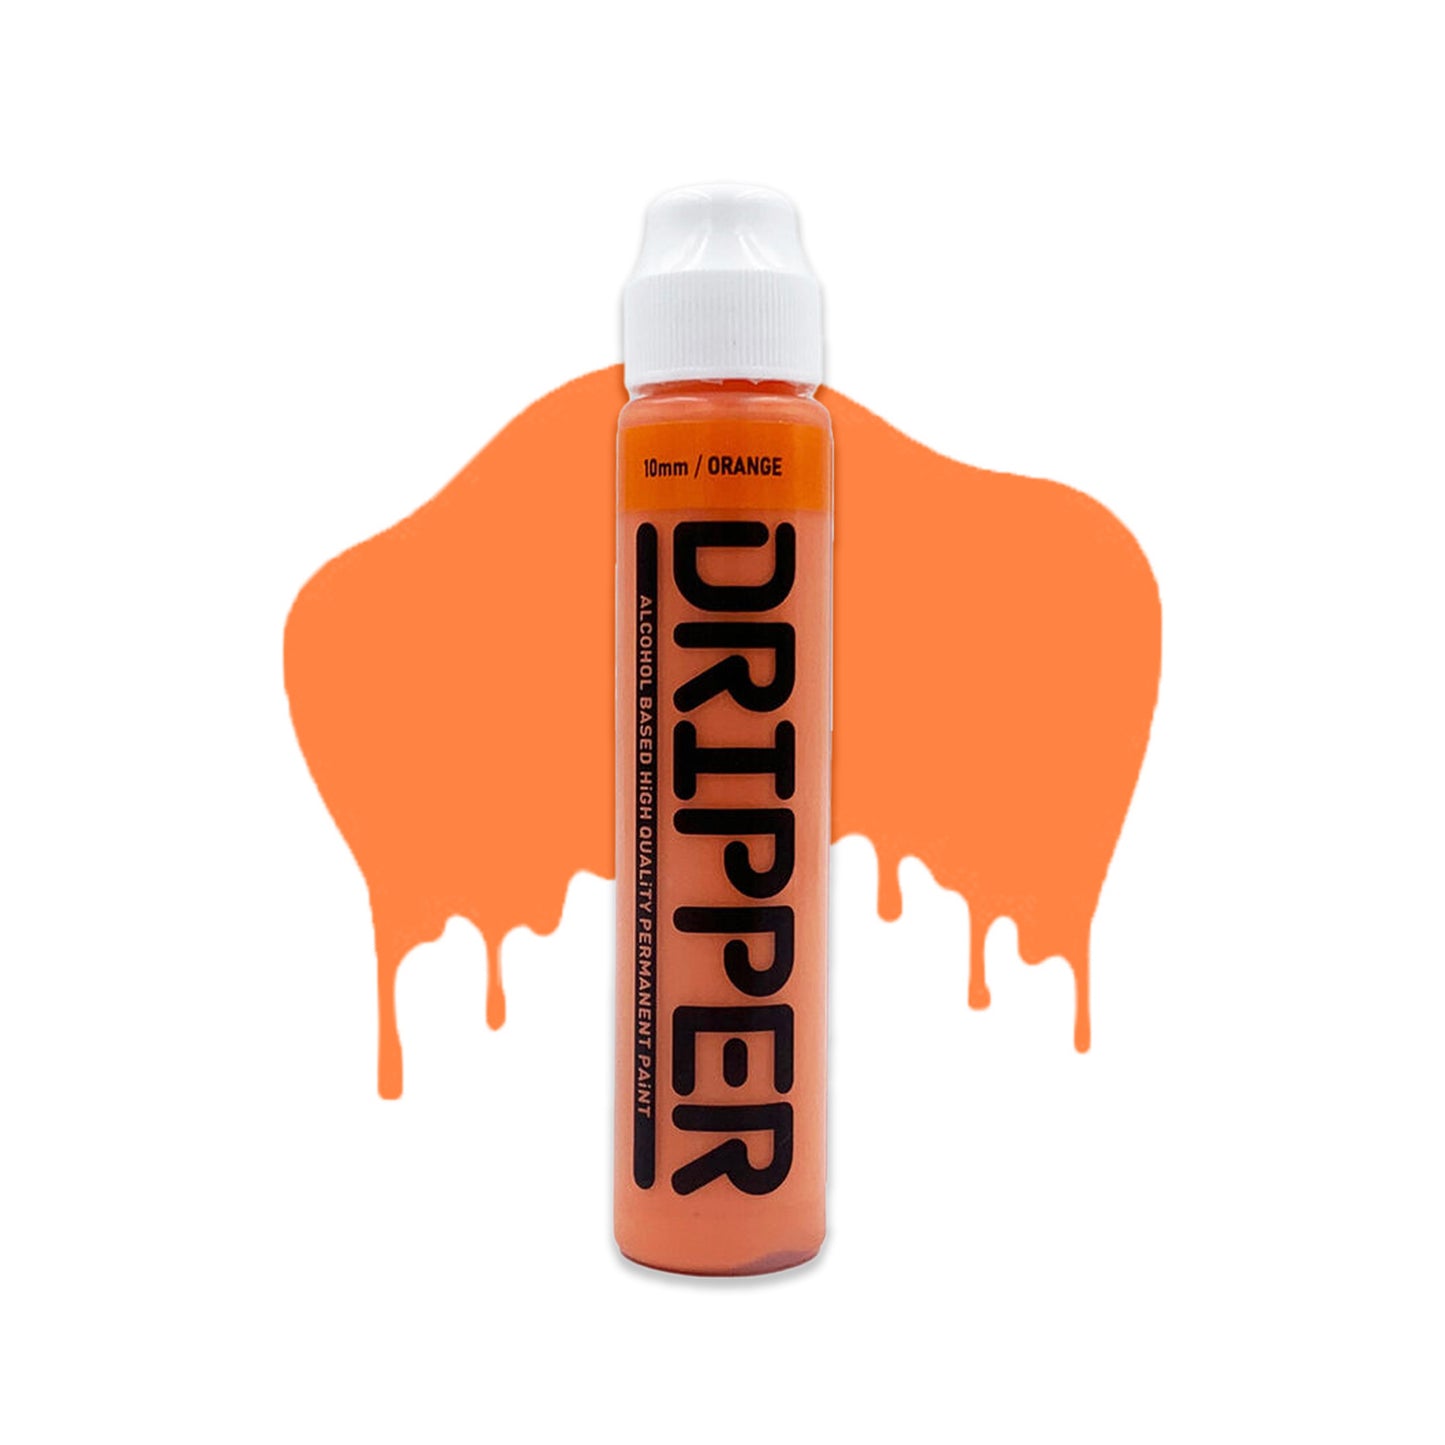 Orange mop container with white cap and the word "Dripper" written on the face in a bold black font. The mop is positioned in front of a white background with drips that match the orange color of the mop.